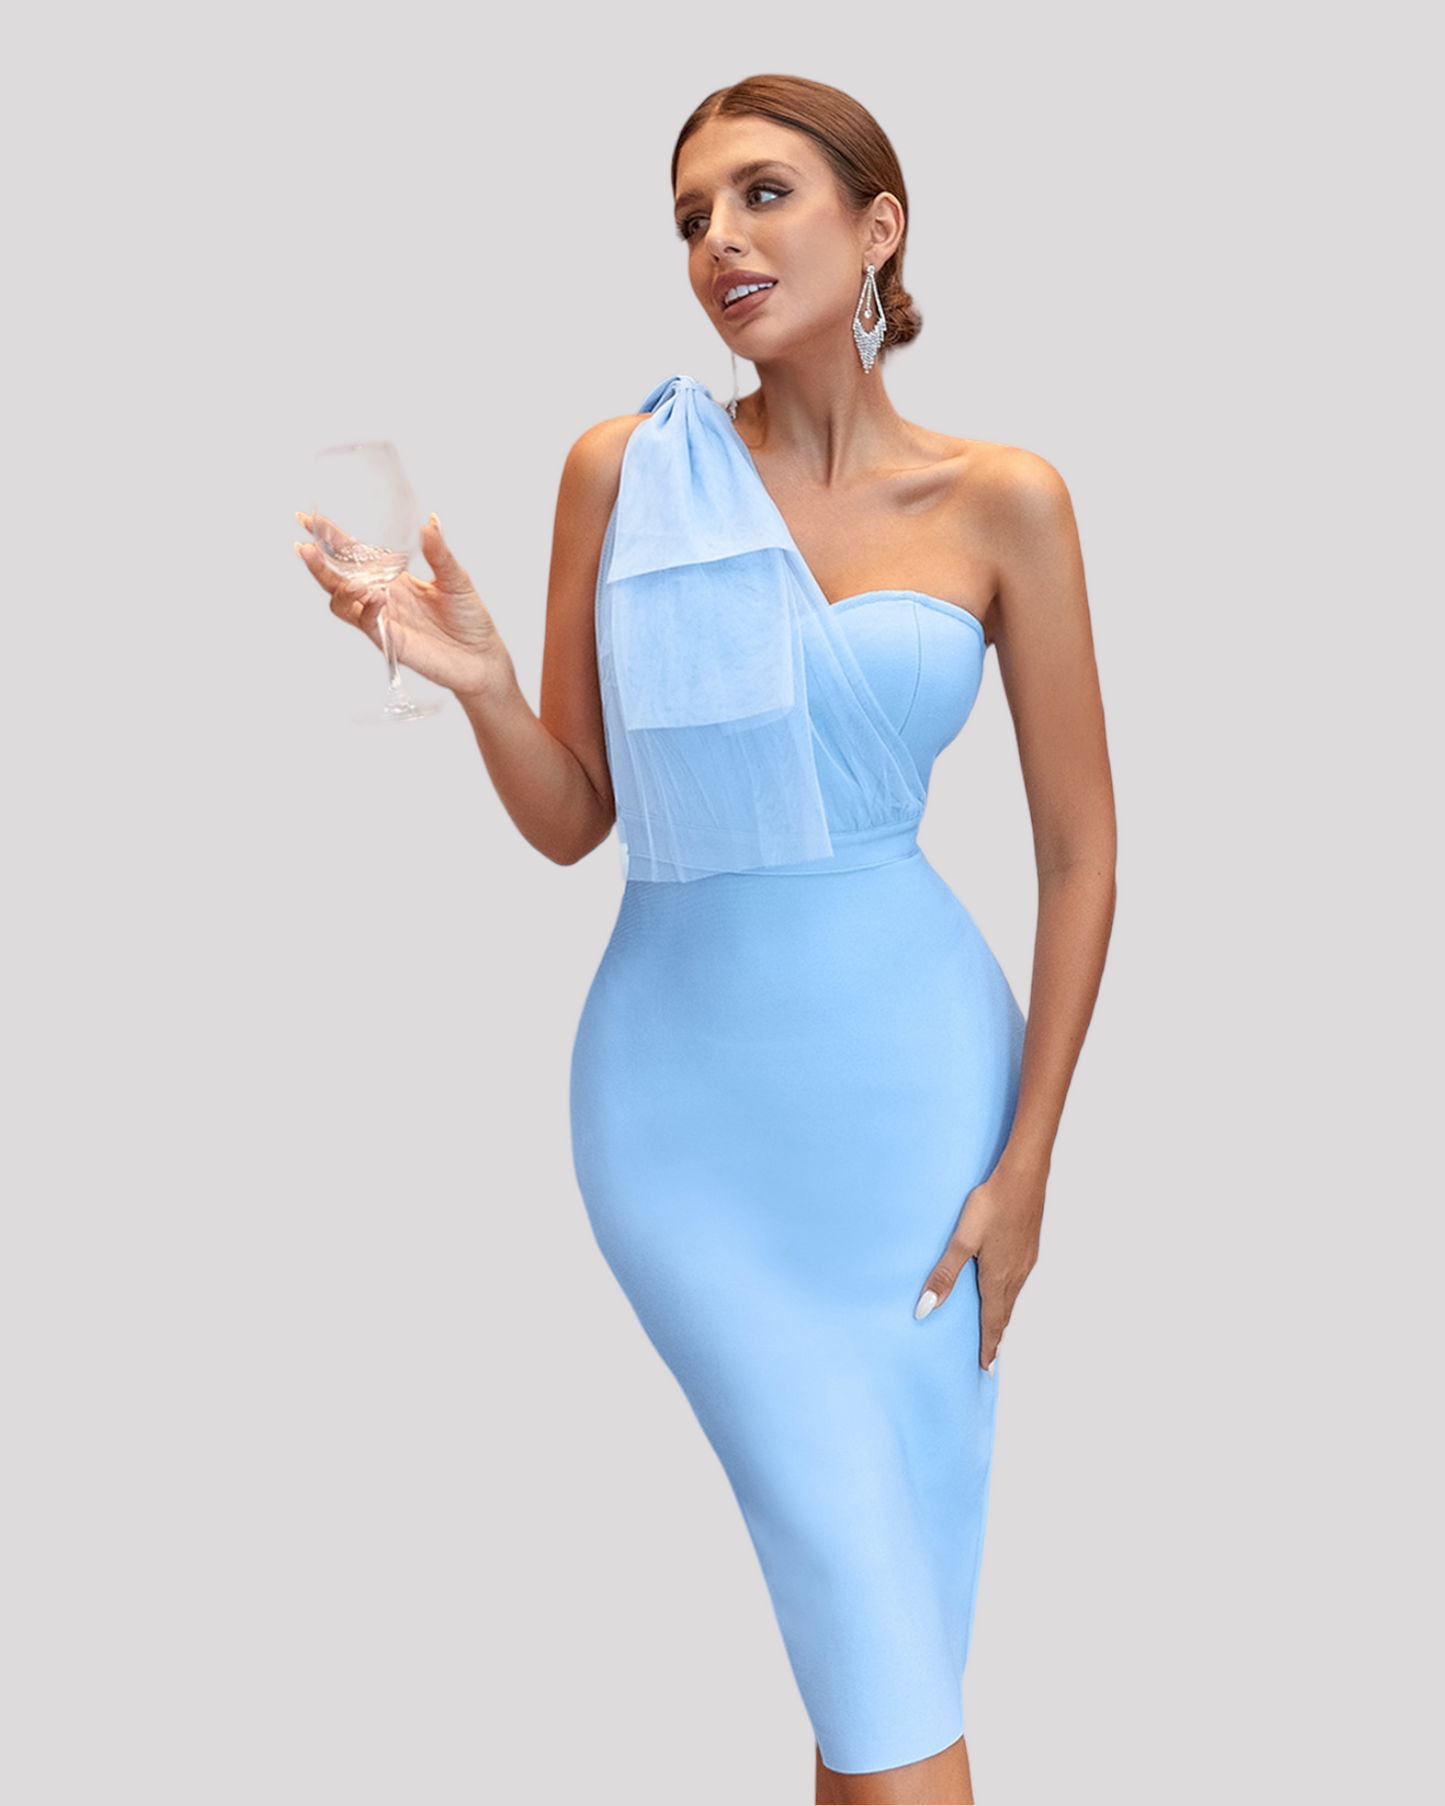 One Shoulder Bow, Strapless Cocktail Dress available in 3 colours